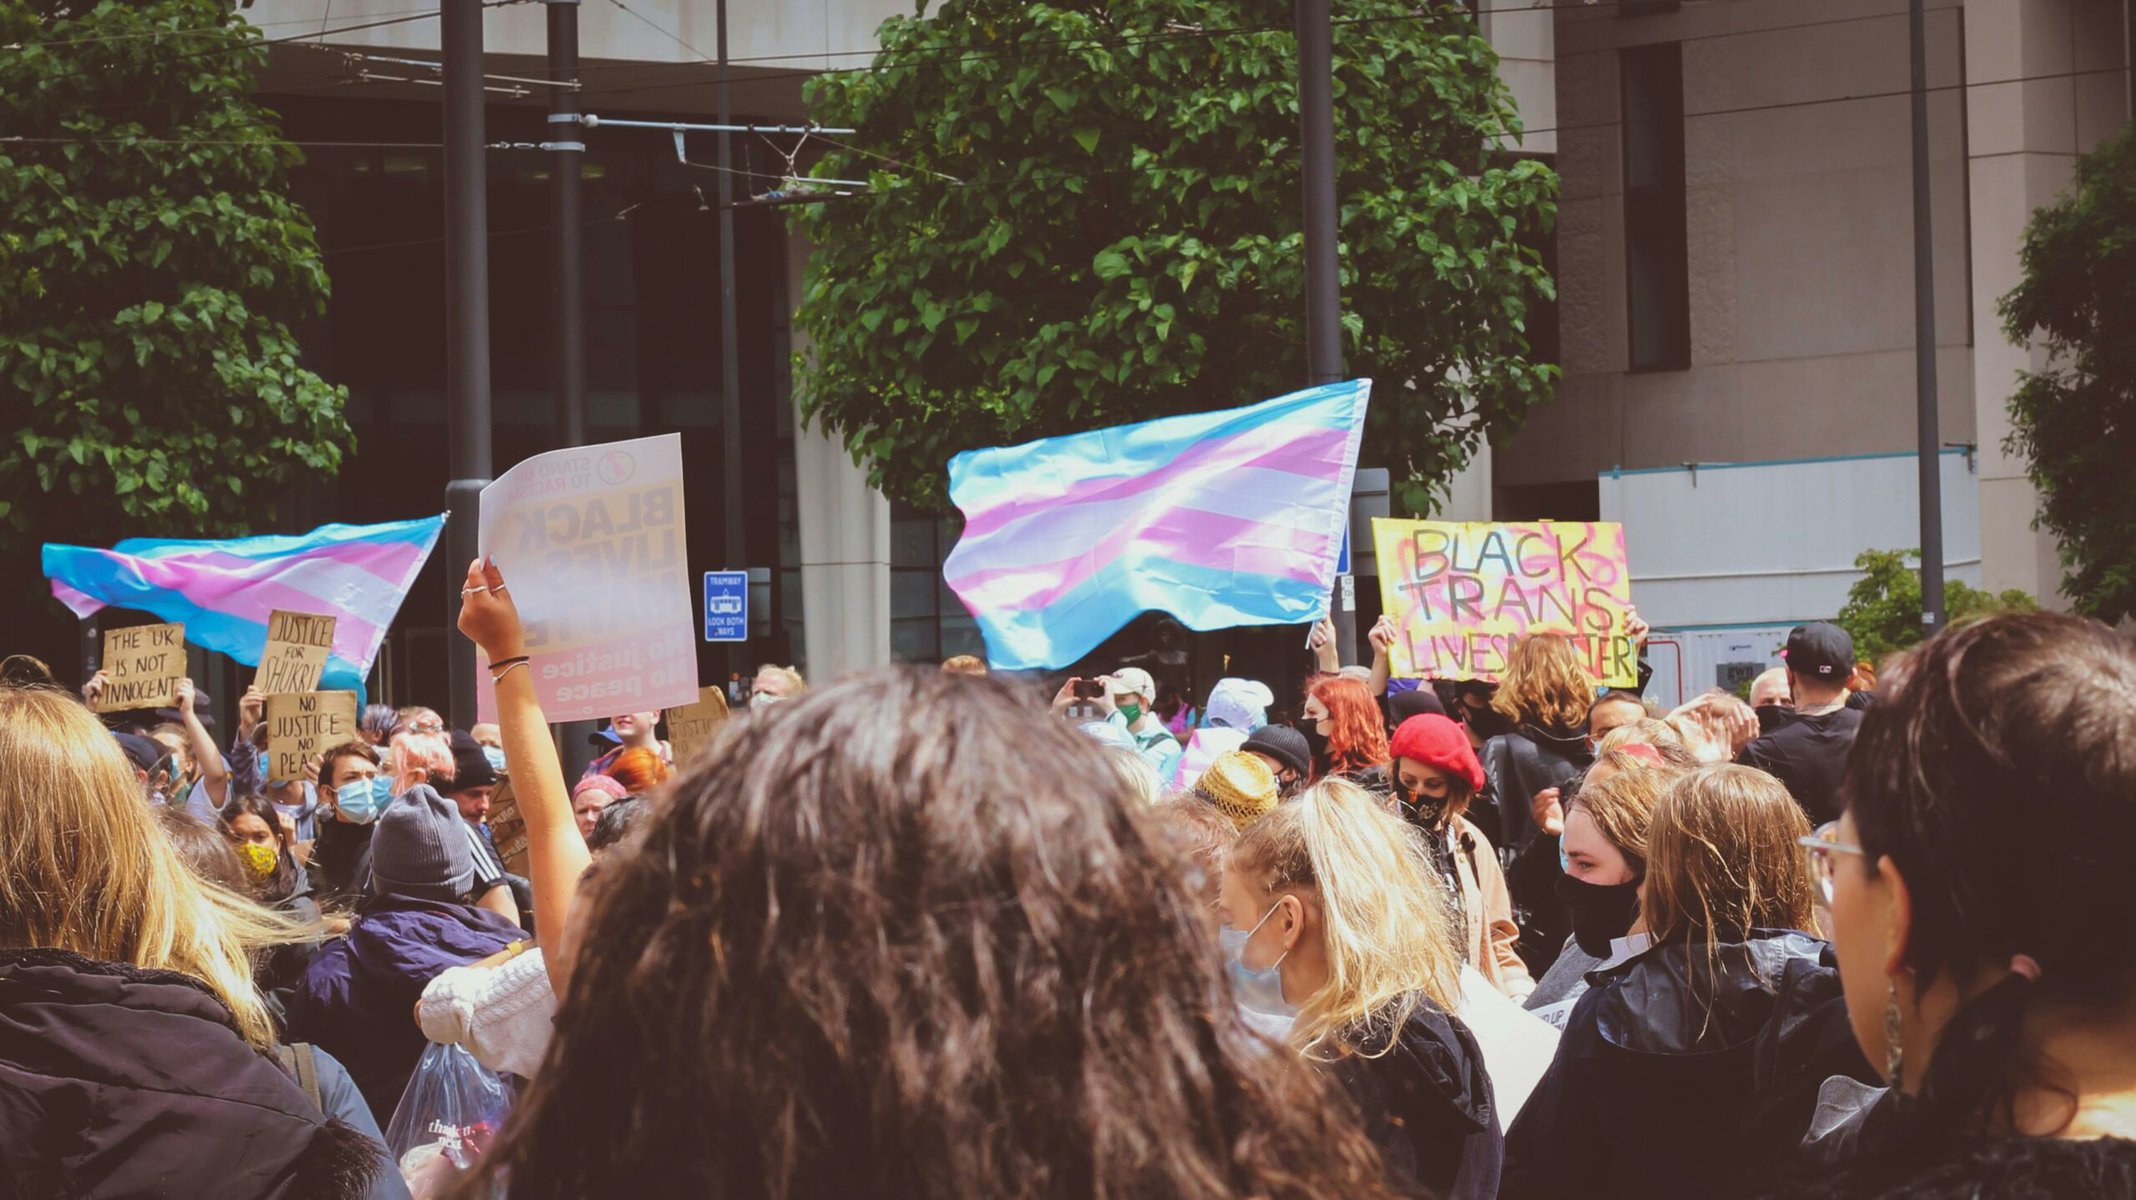 Image from transgender march for justice by Frankie Ashcroft via pexel